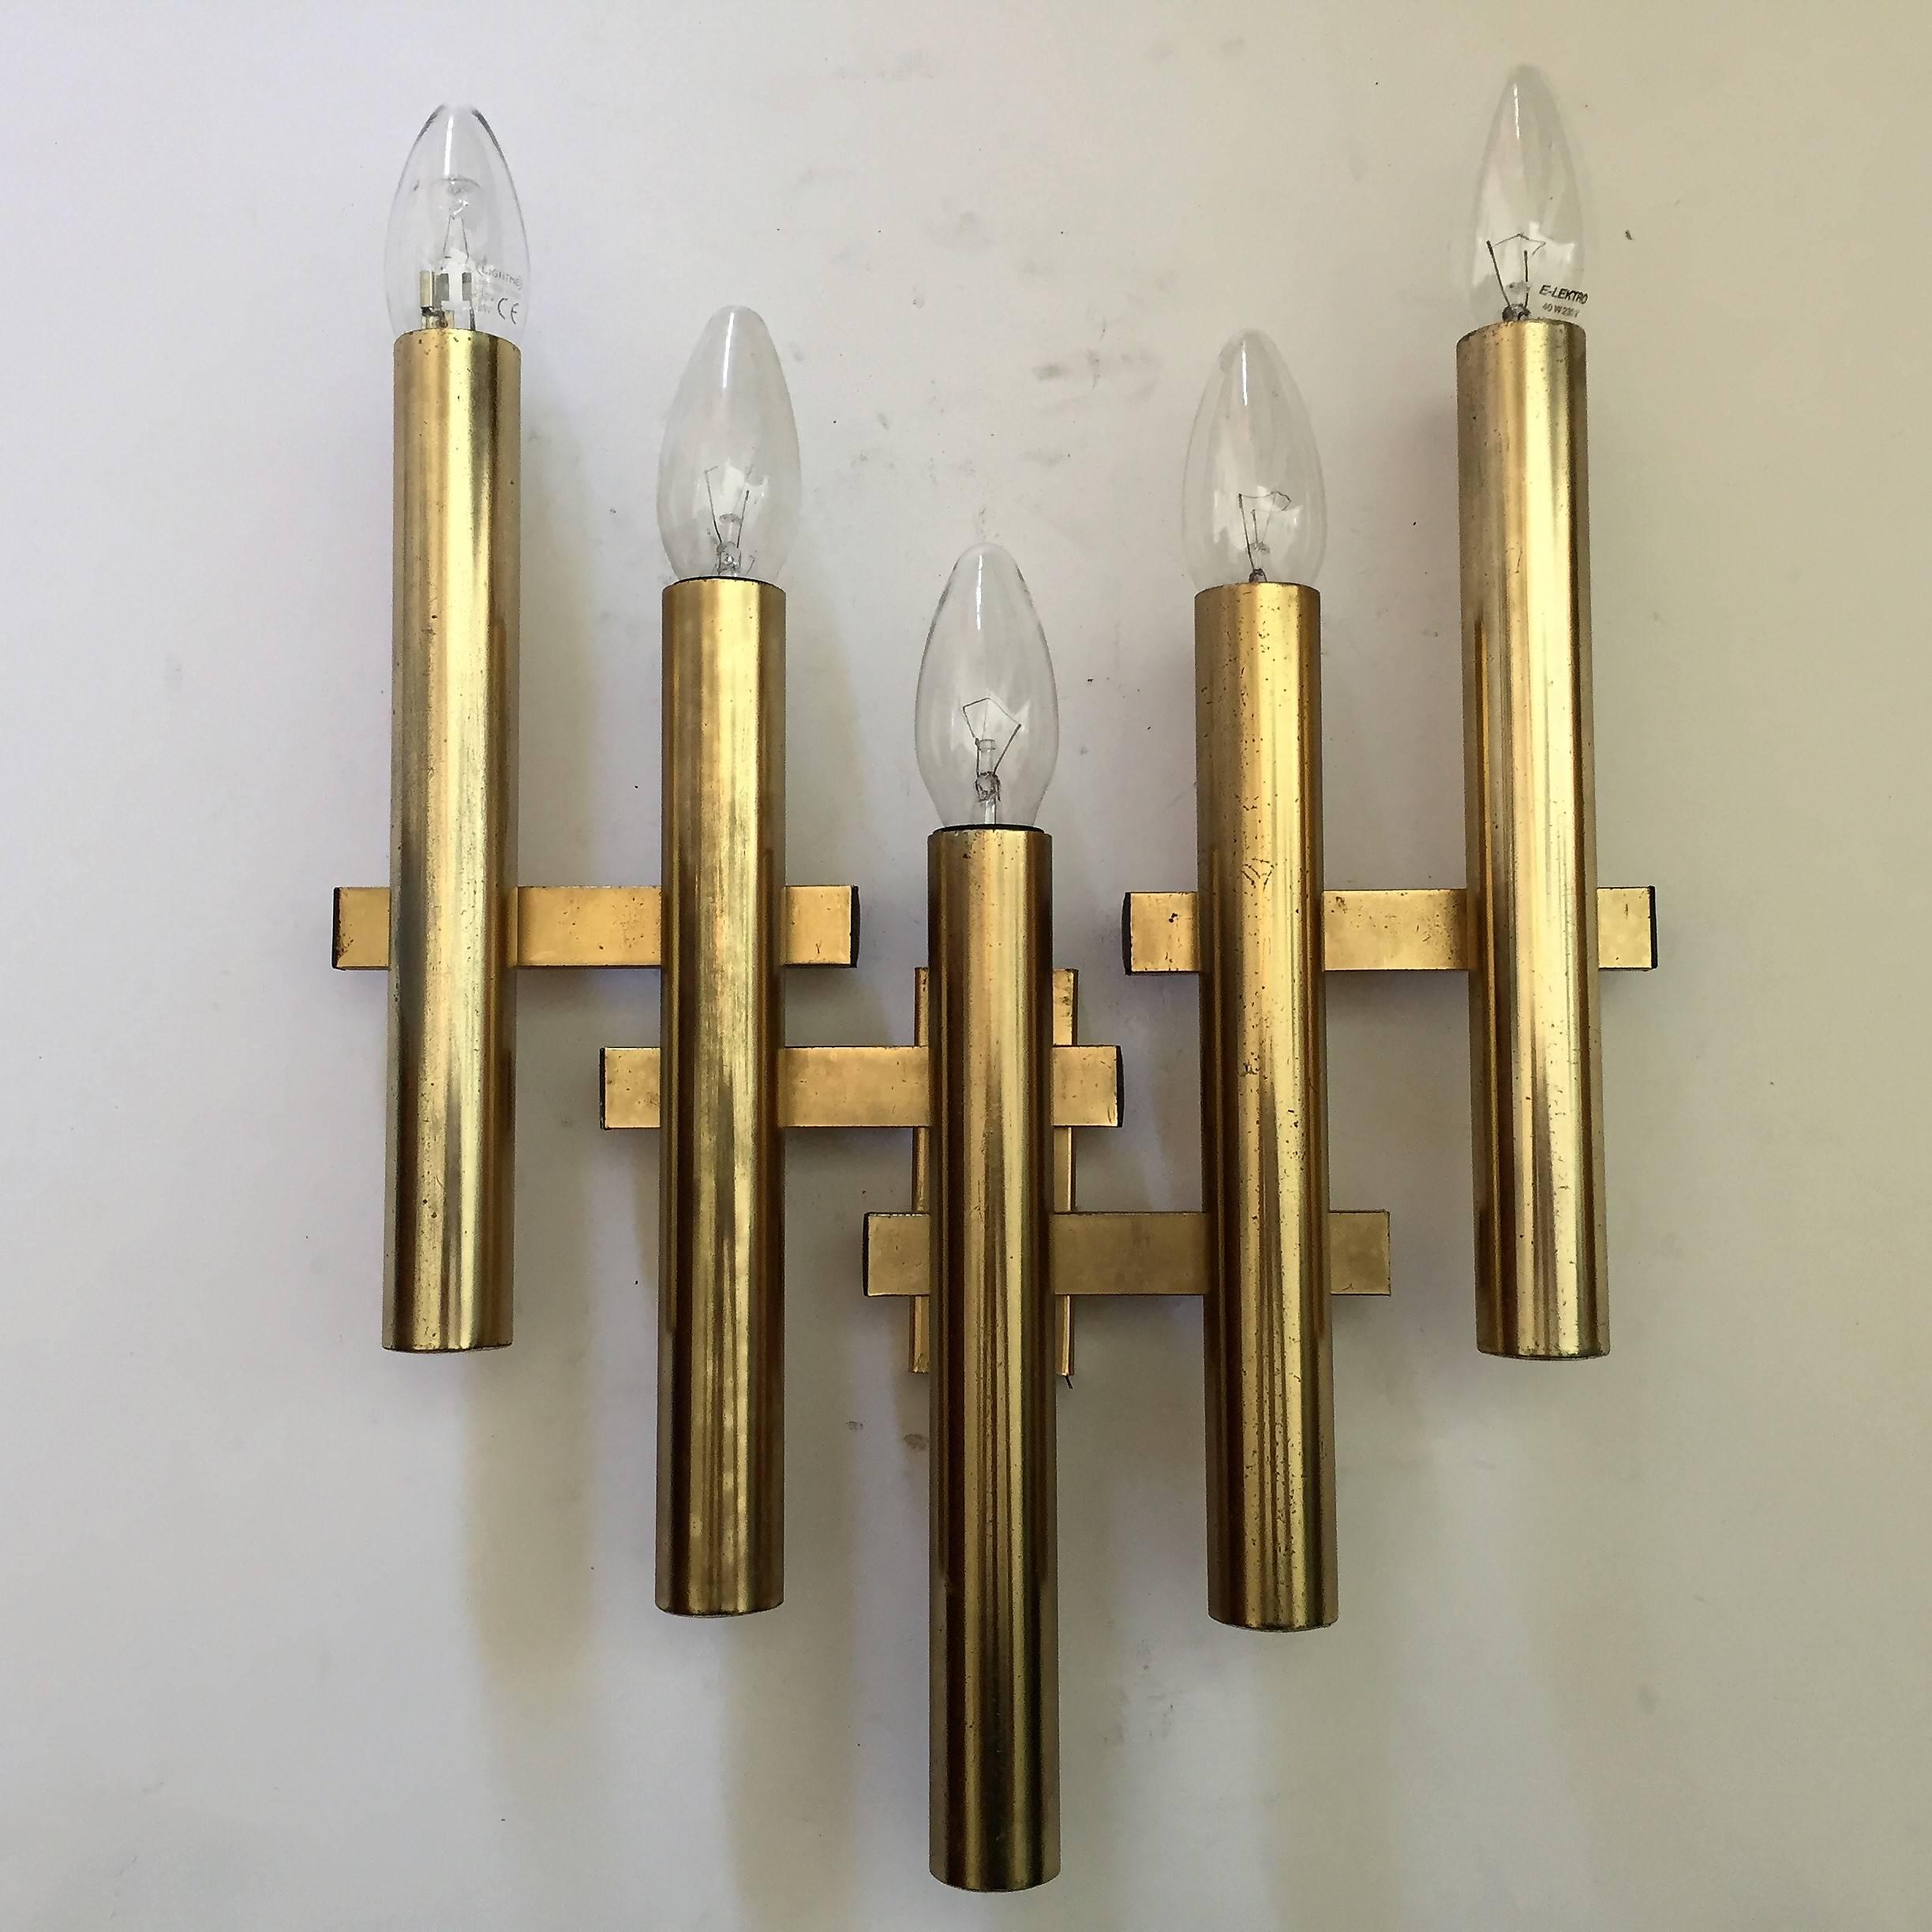 A rare large five light pair of aged polished brass modern wall lights by the famed lighting company, Sciolari. Newly rewired.